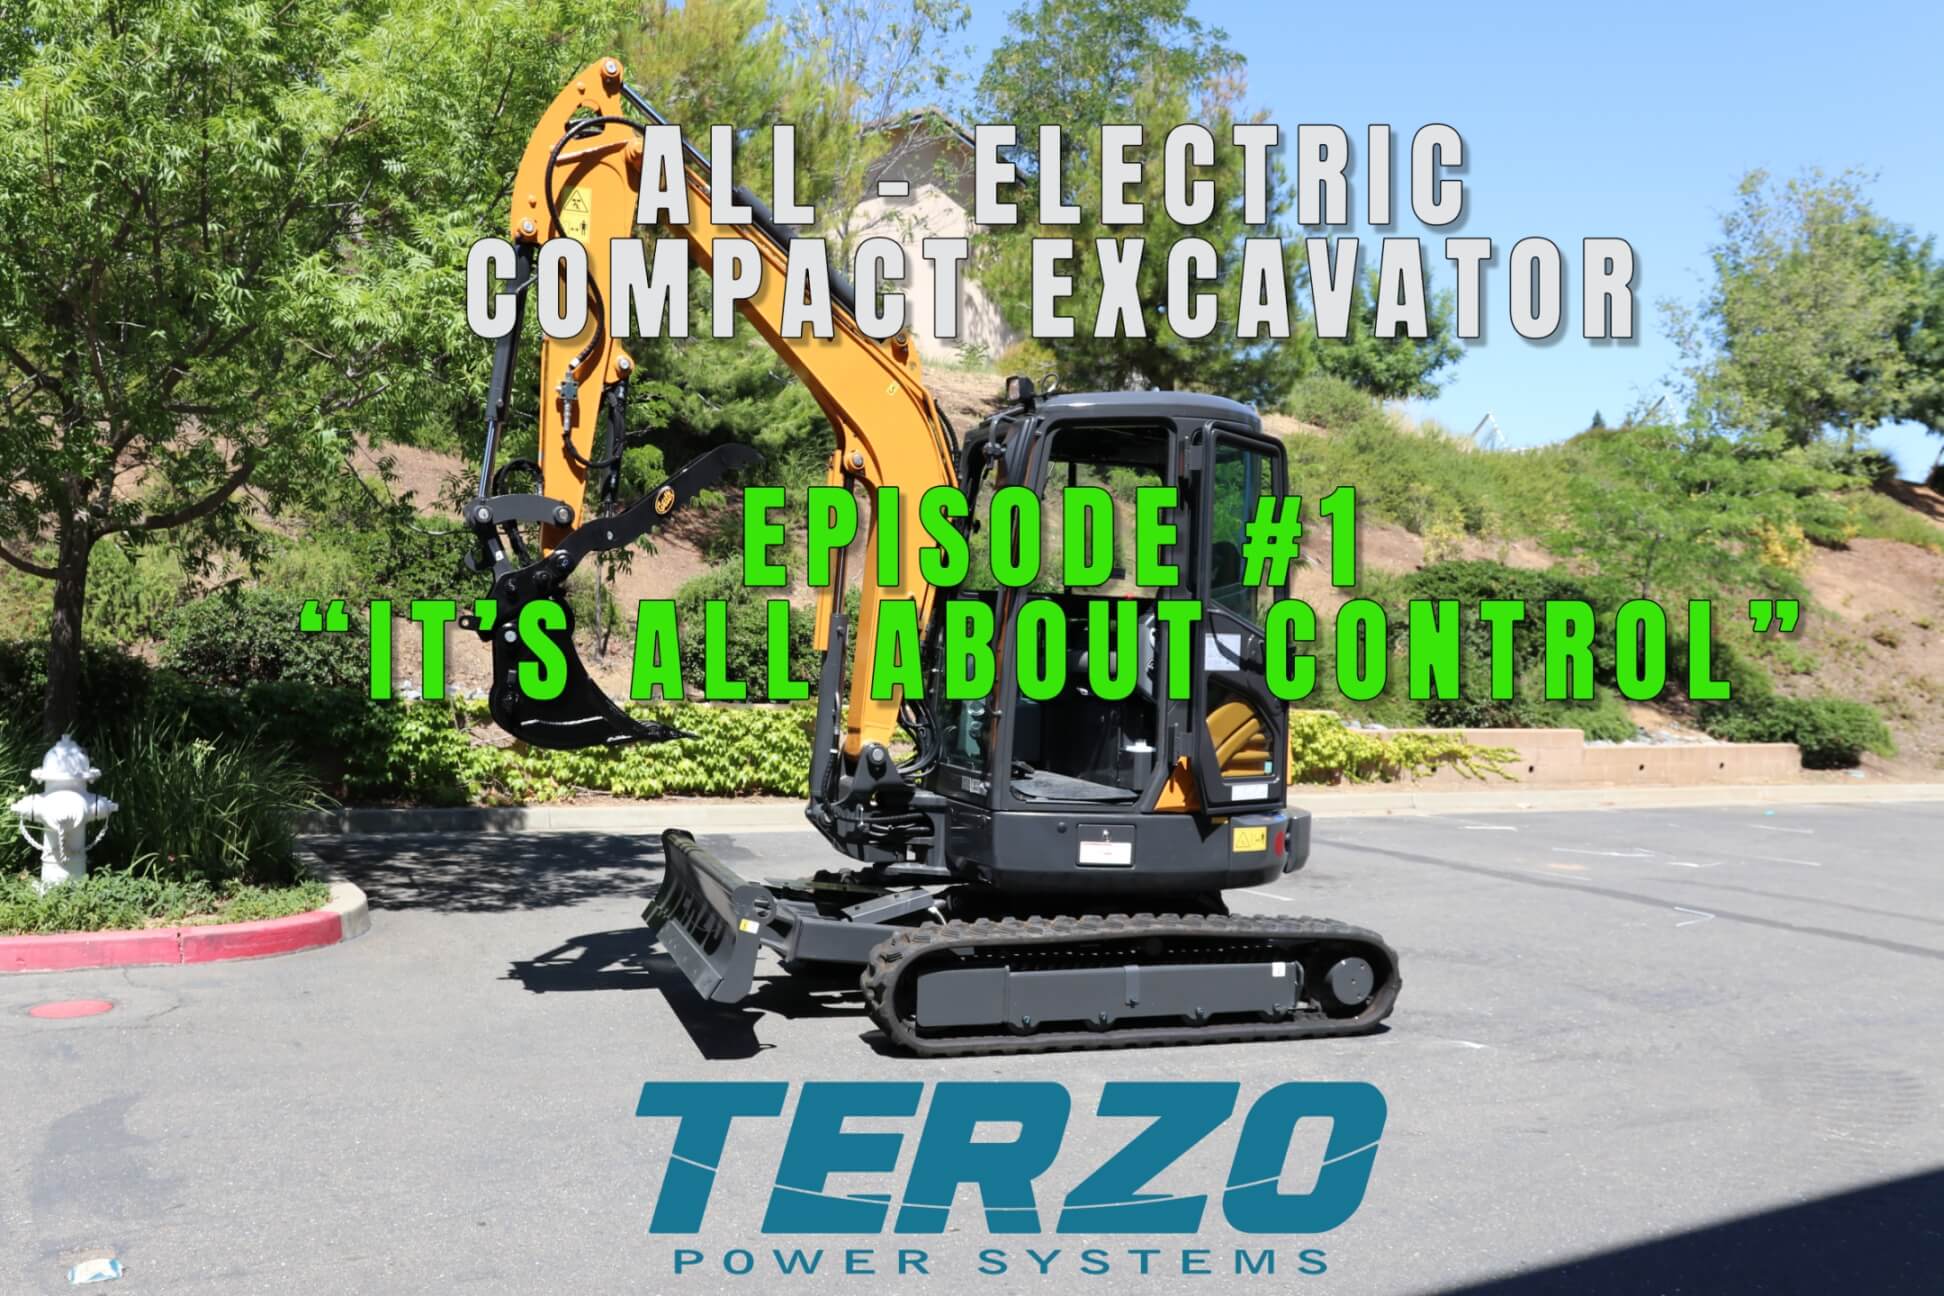 All-Electric Compact Excavator, Episode 1 - Terzo Power Systems